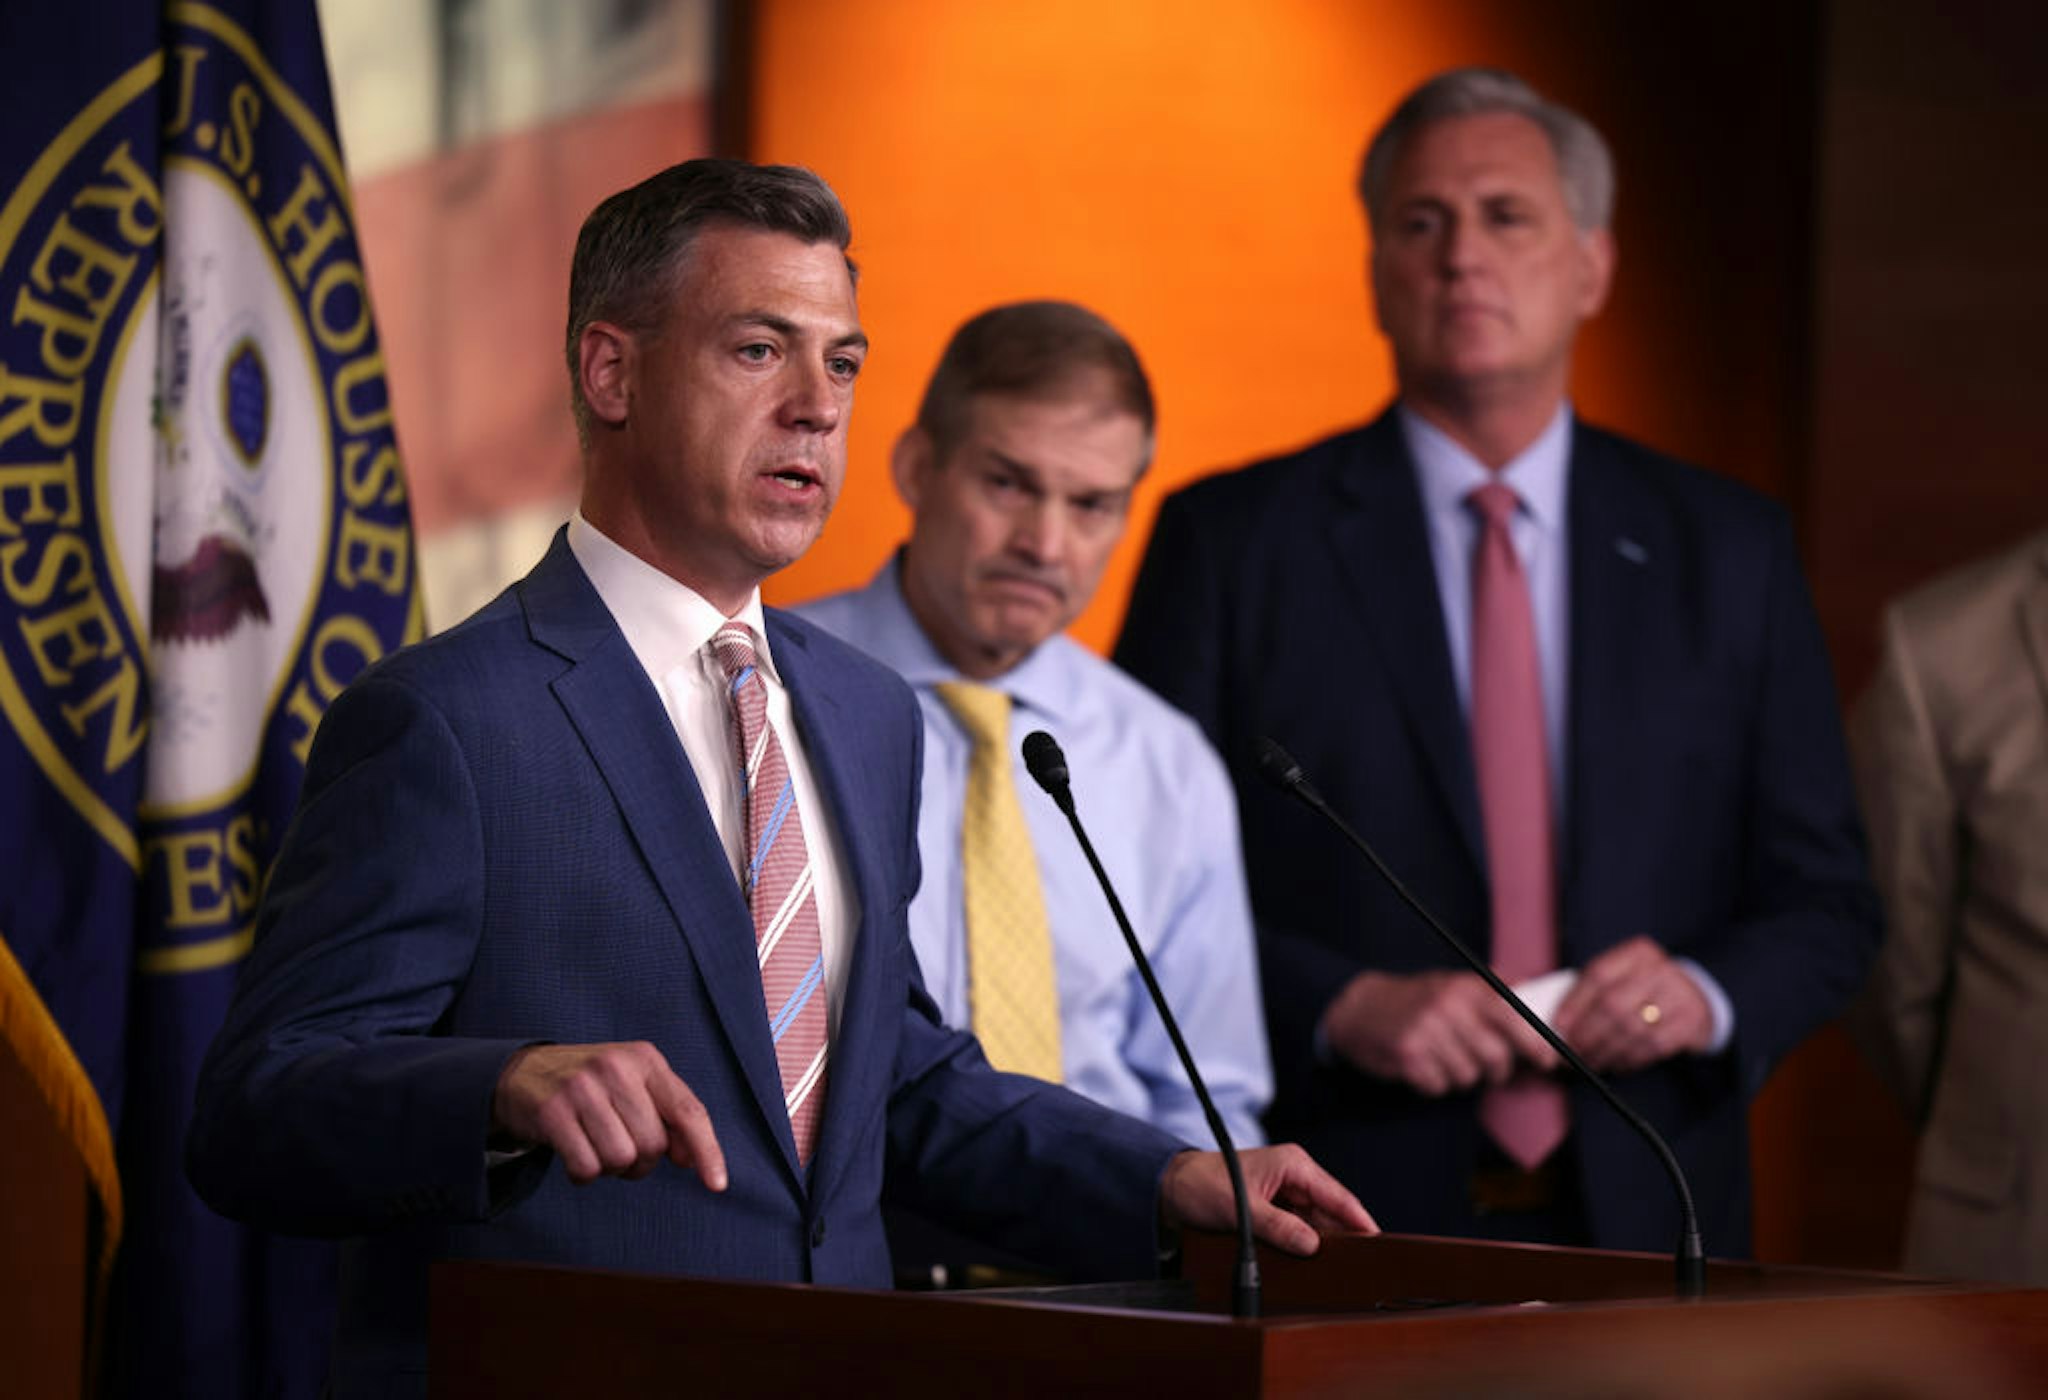 WASHINGTON, DC - JULY 21: Rep. Jim Banks (R-IN) (L), joined by Rep. Jim Jordan (R-ON) (C) and House Minority Leader Kevin McCarthy (R-CA) speaks at a news conference on House Speaker Nancy Pelosi’s decision to reject two of Leader McCarthy’s selected members from serving on the committee investigating the January 6th riots on July 21, 2021 in Washington, DC. Speaker Pelosi announced she would be rejecting Rep. Banks and Rep. Jordan’s assignment to the committee. (Photo by Kevin Dietsch/Getty Images)